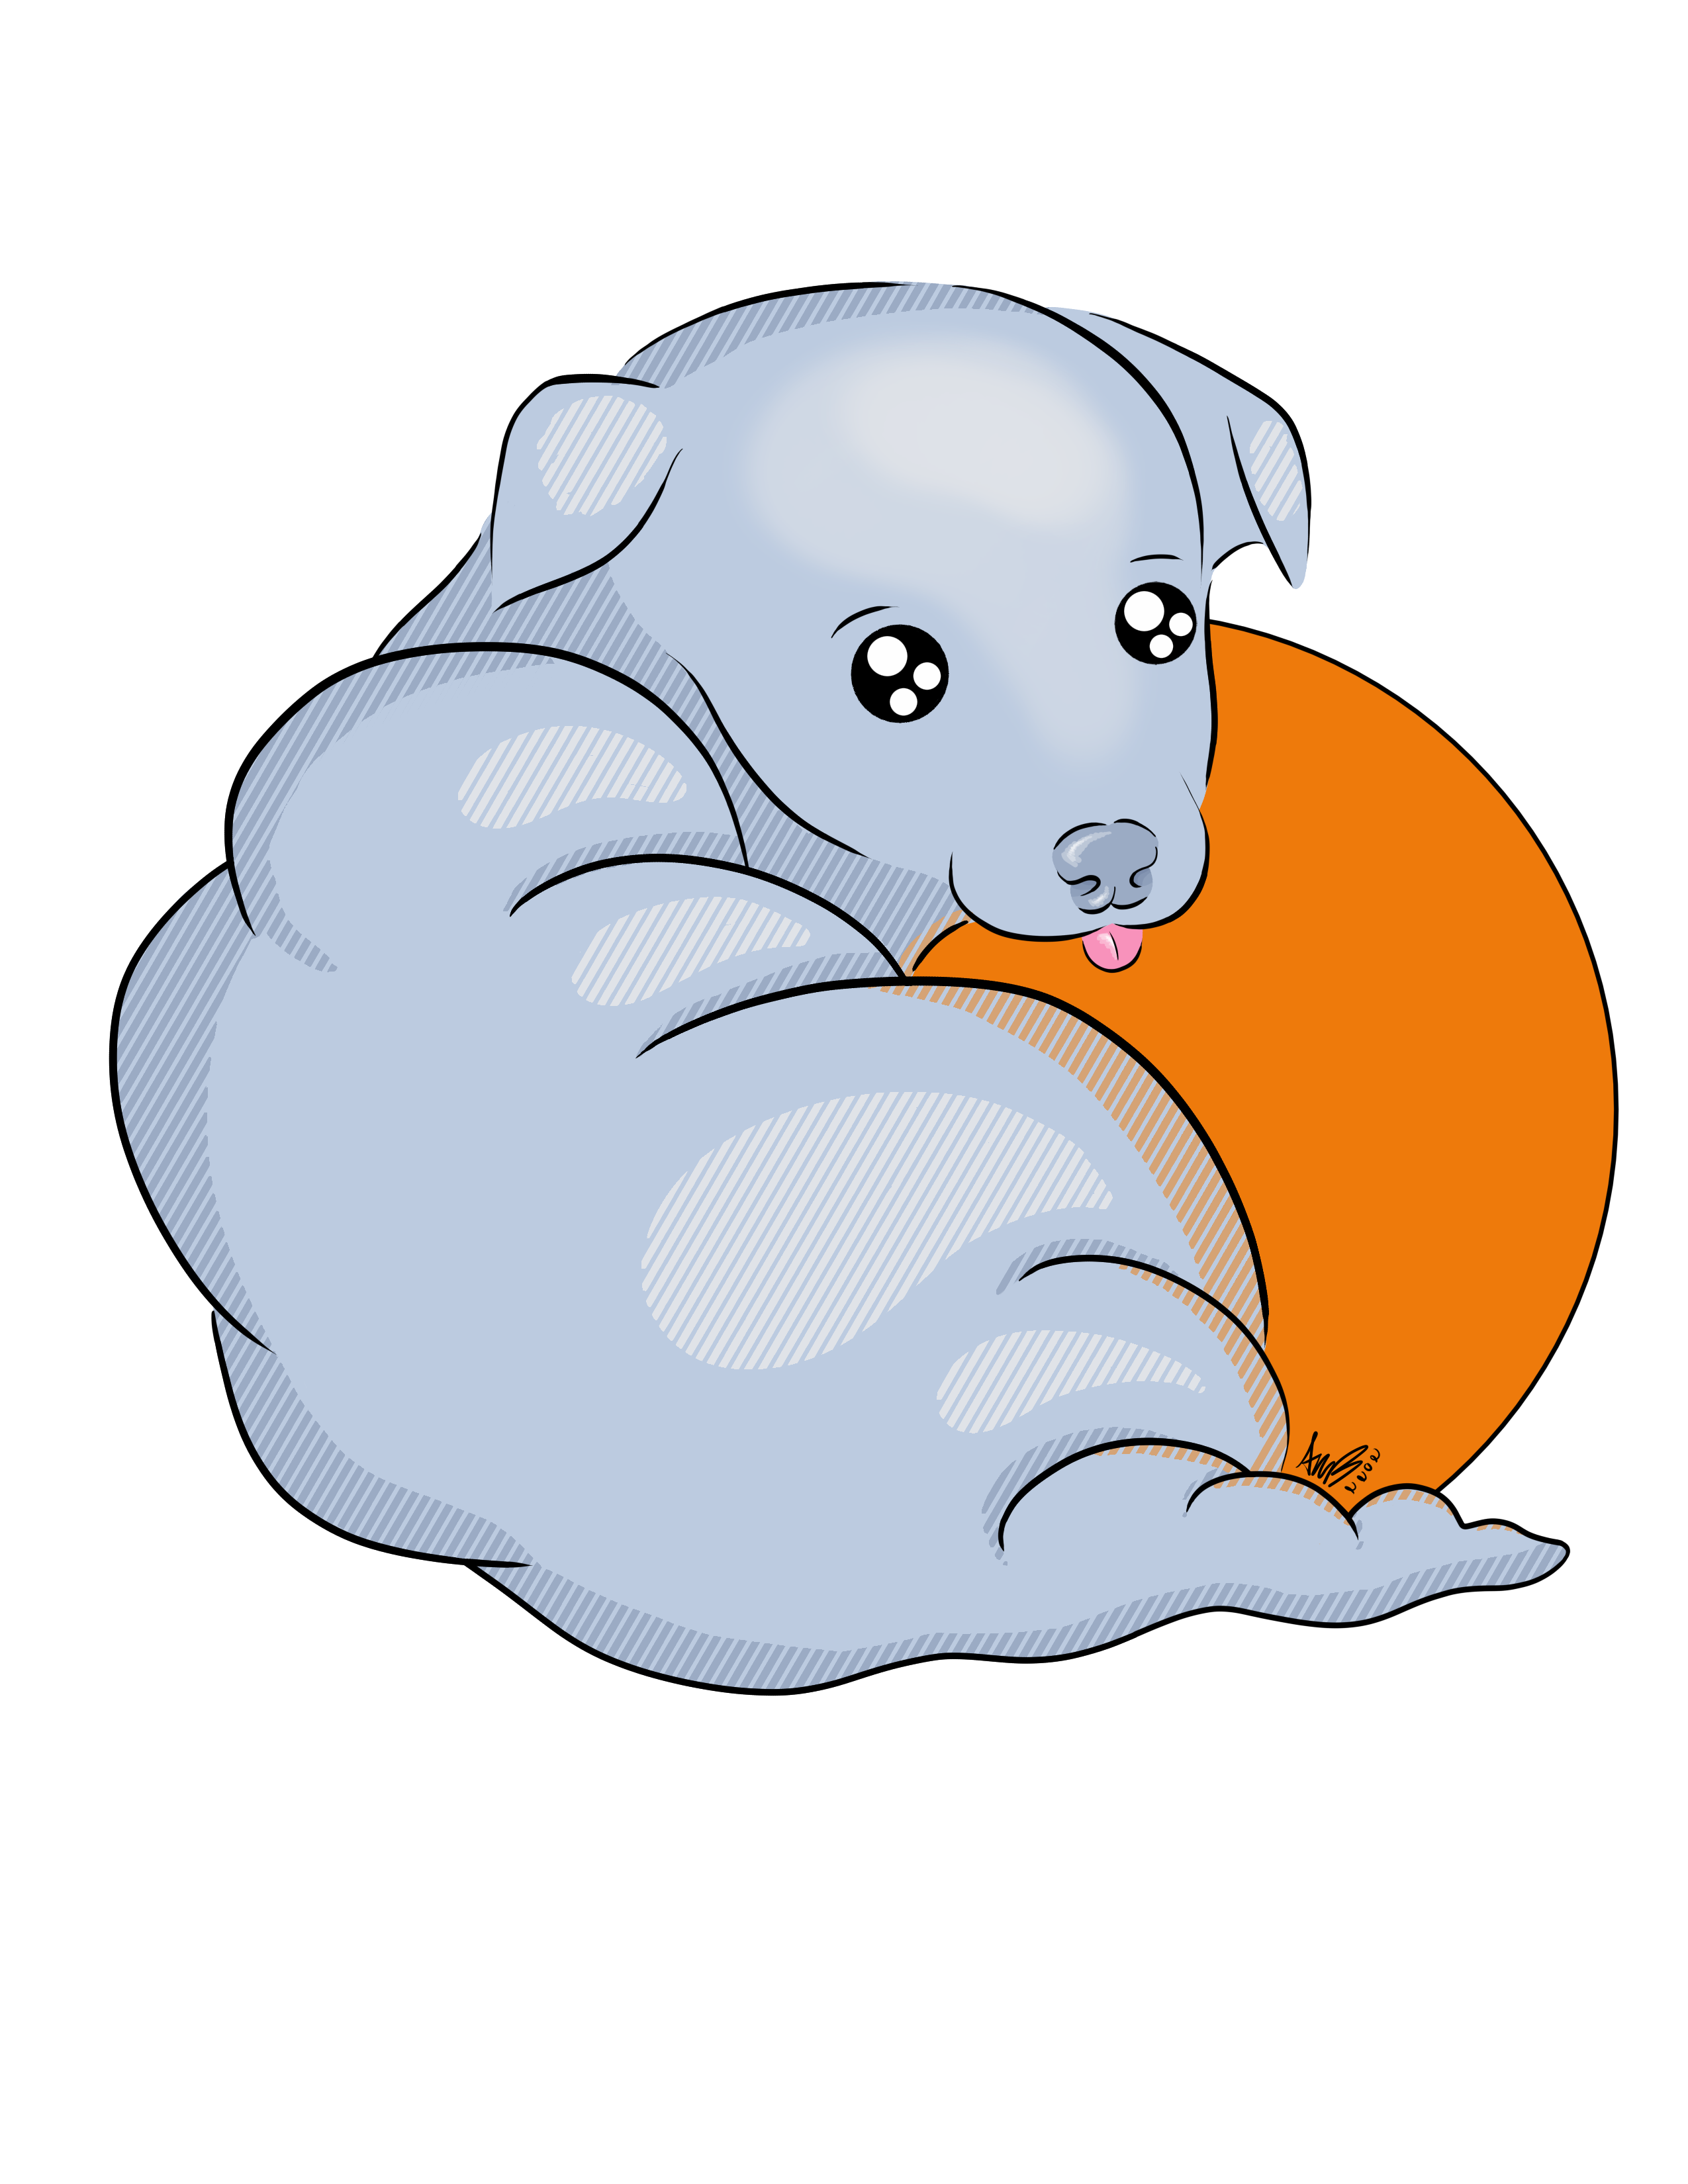 Cloud Puppy Games Logo, a young dog drawn to look like a cloud sticks their tongue out at you, there is a yellow sun behind the cloud puppy.